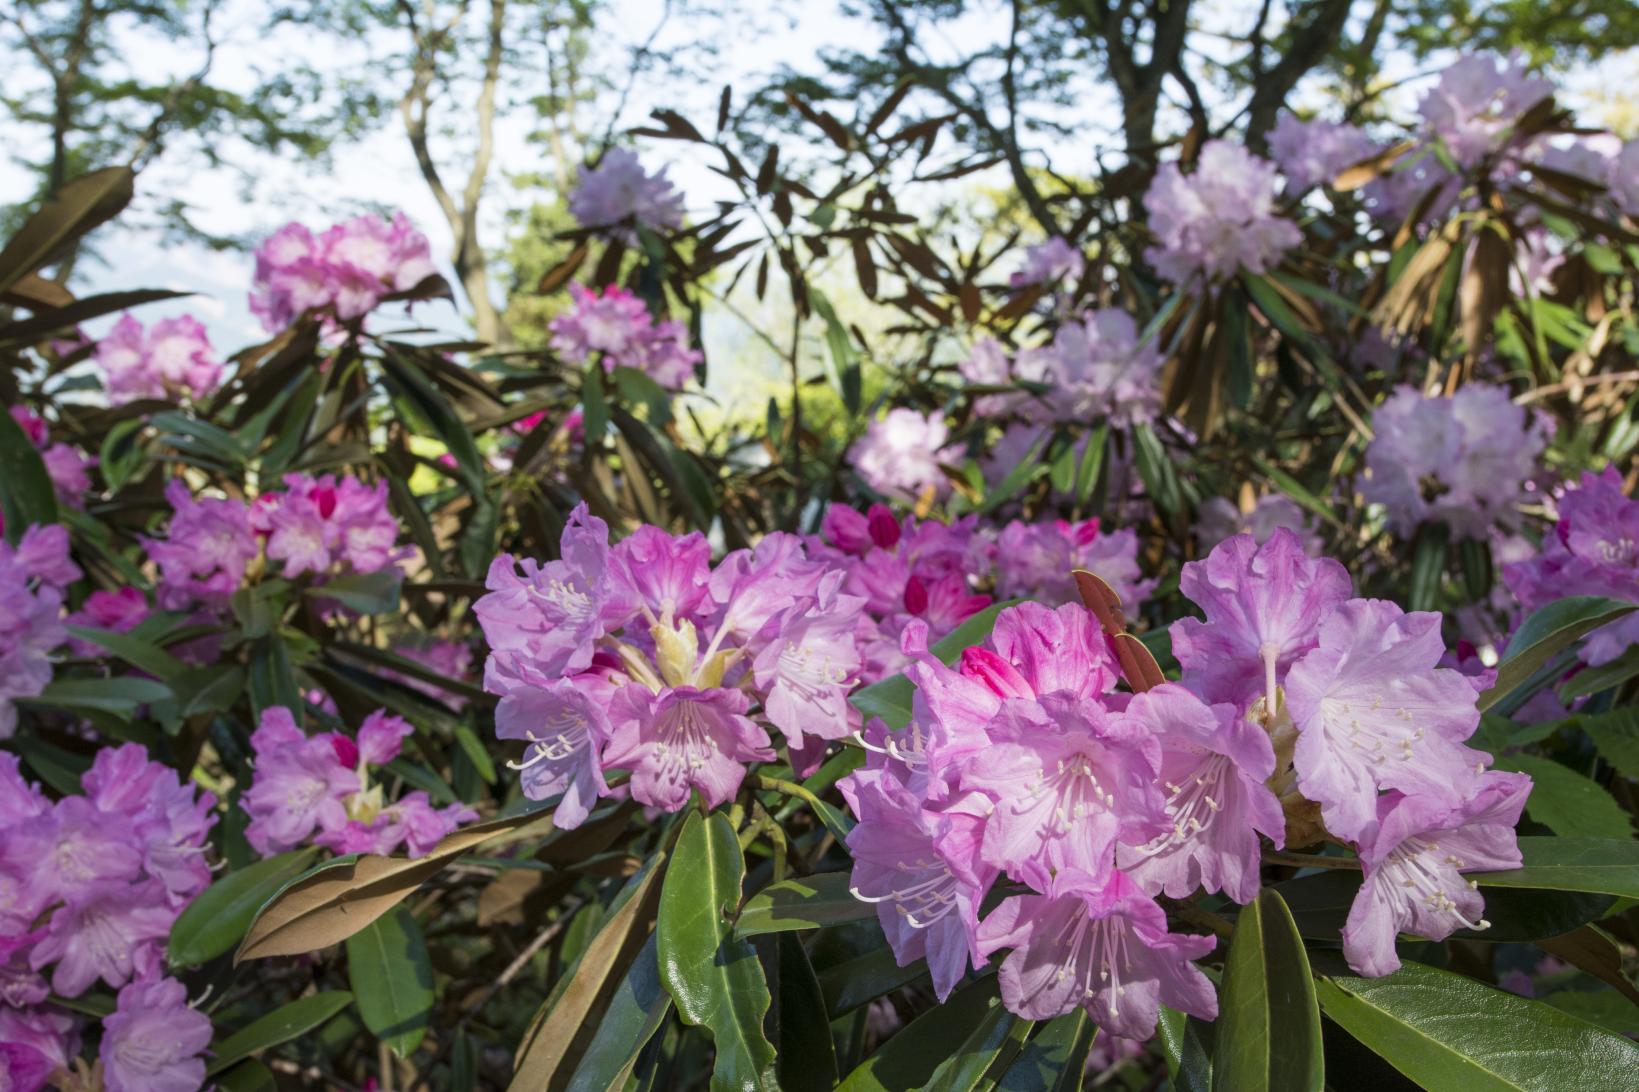 Rhododendron Festival" at Mt.-1